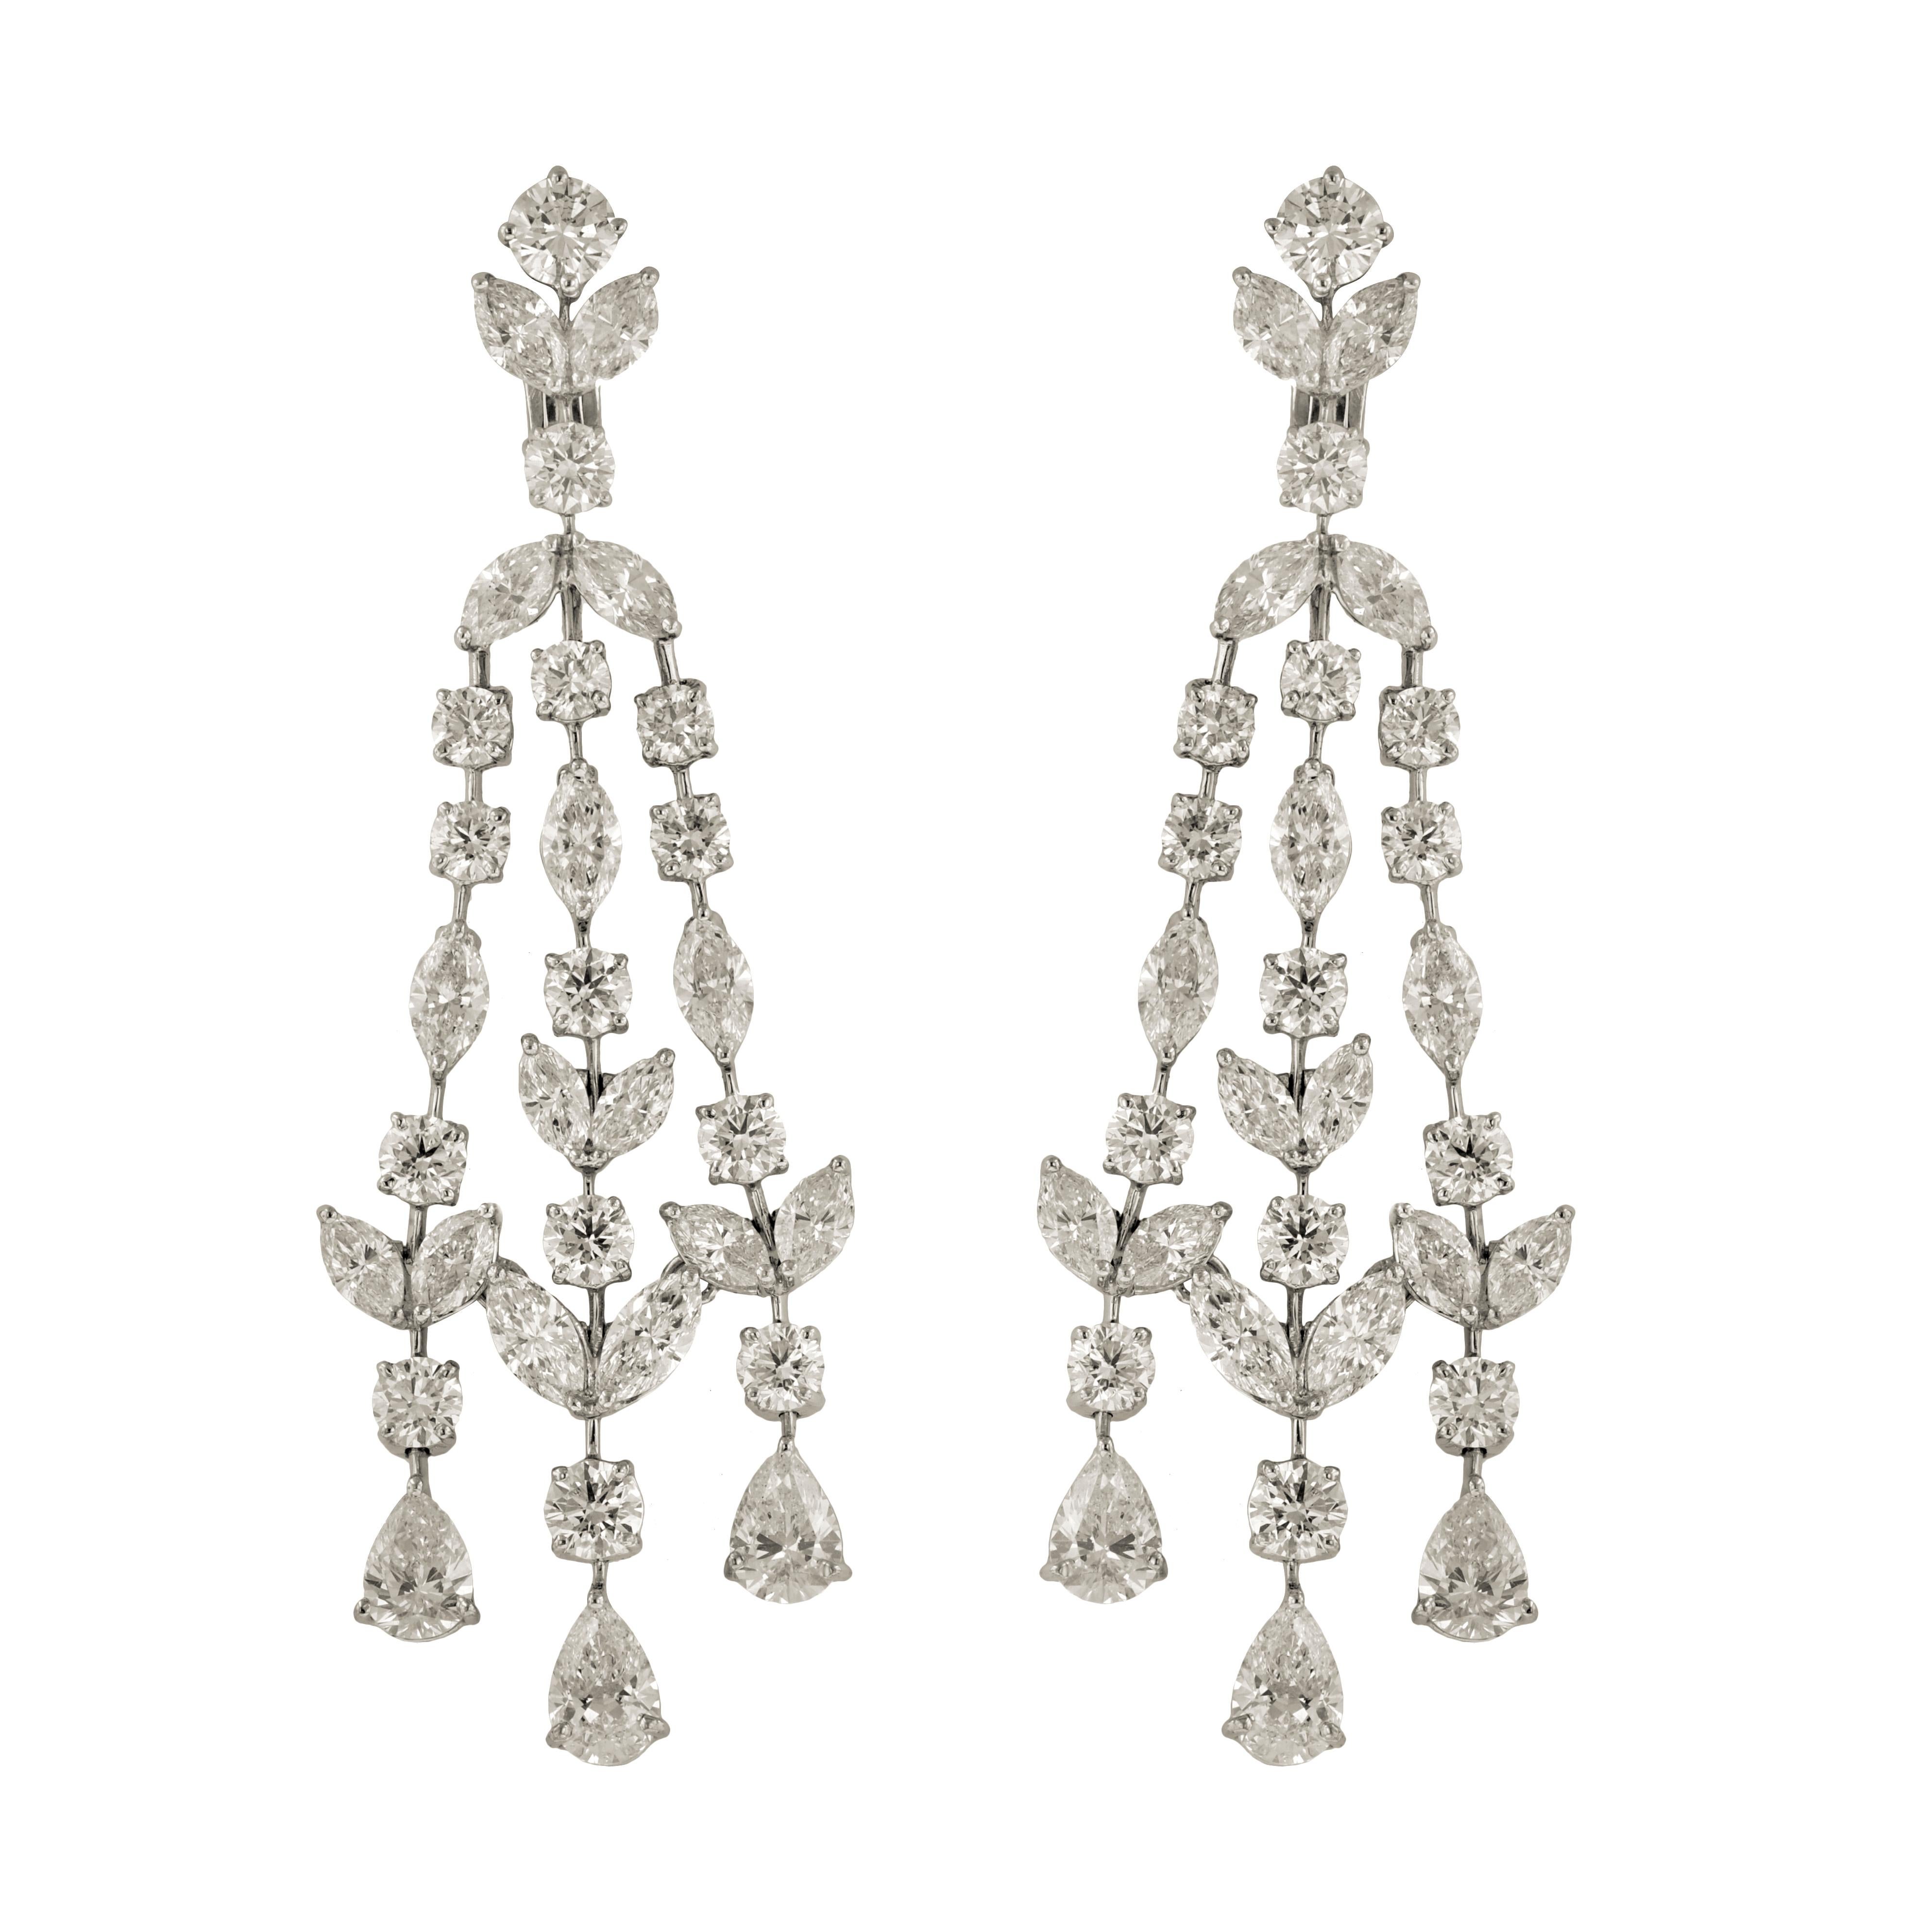 Platinum diamond chandelier earrings with 5 gia certified diamonds, features 30.50ct of round, pear shape and marquise diamonds.
